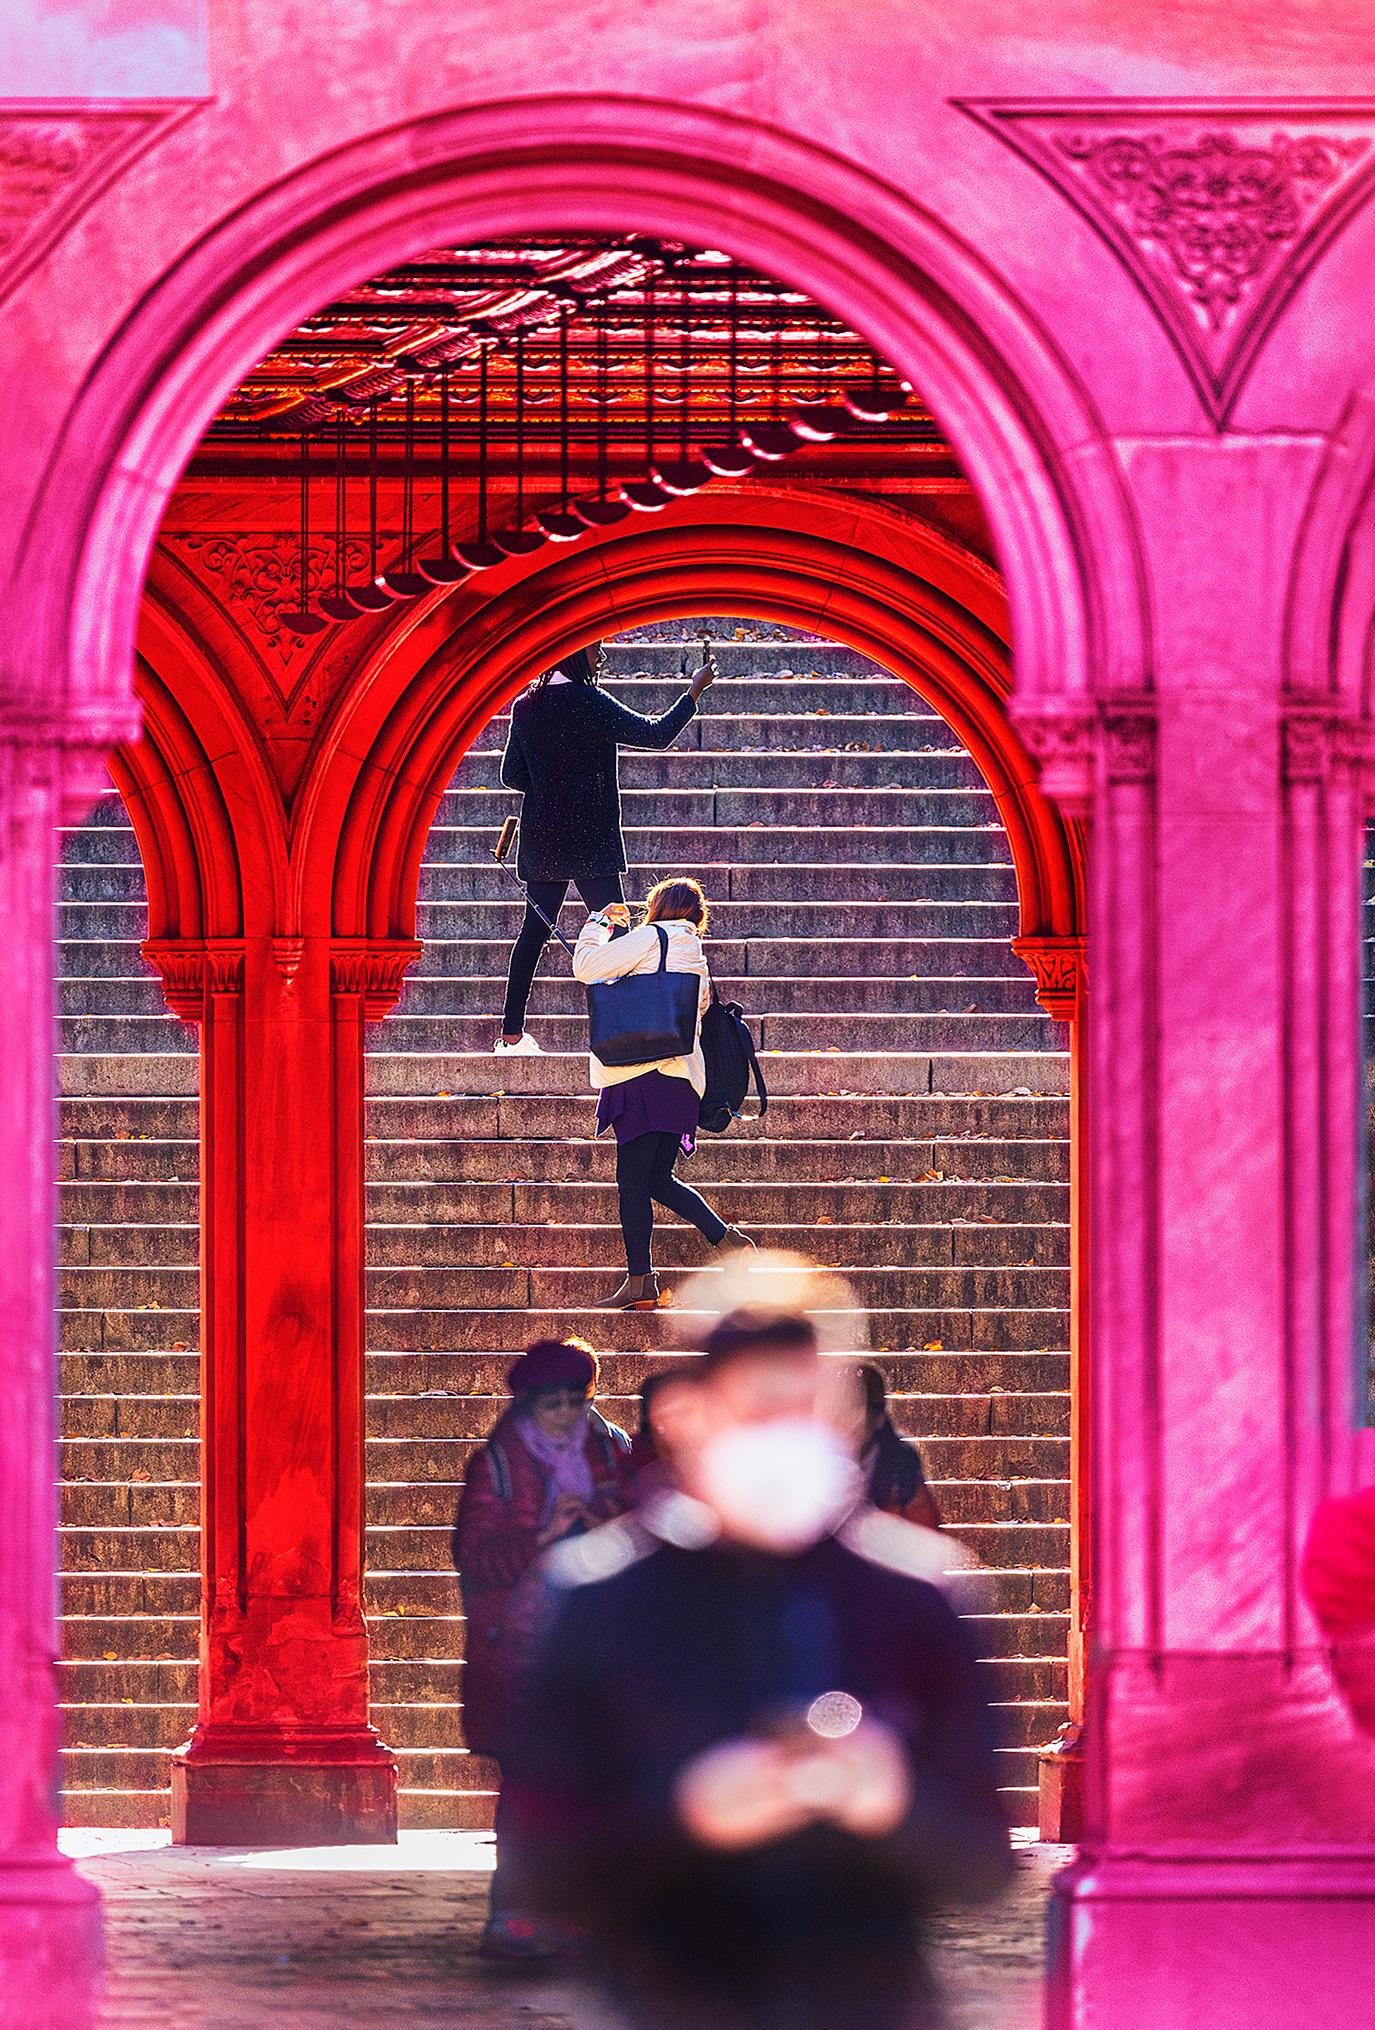 Mitchell Funk Abstract Photograph - Central  Parks Bethesda Terrace in Magenta Light 